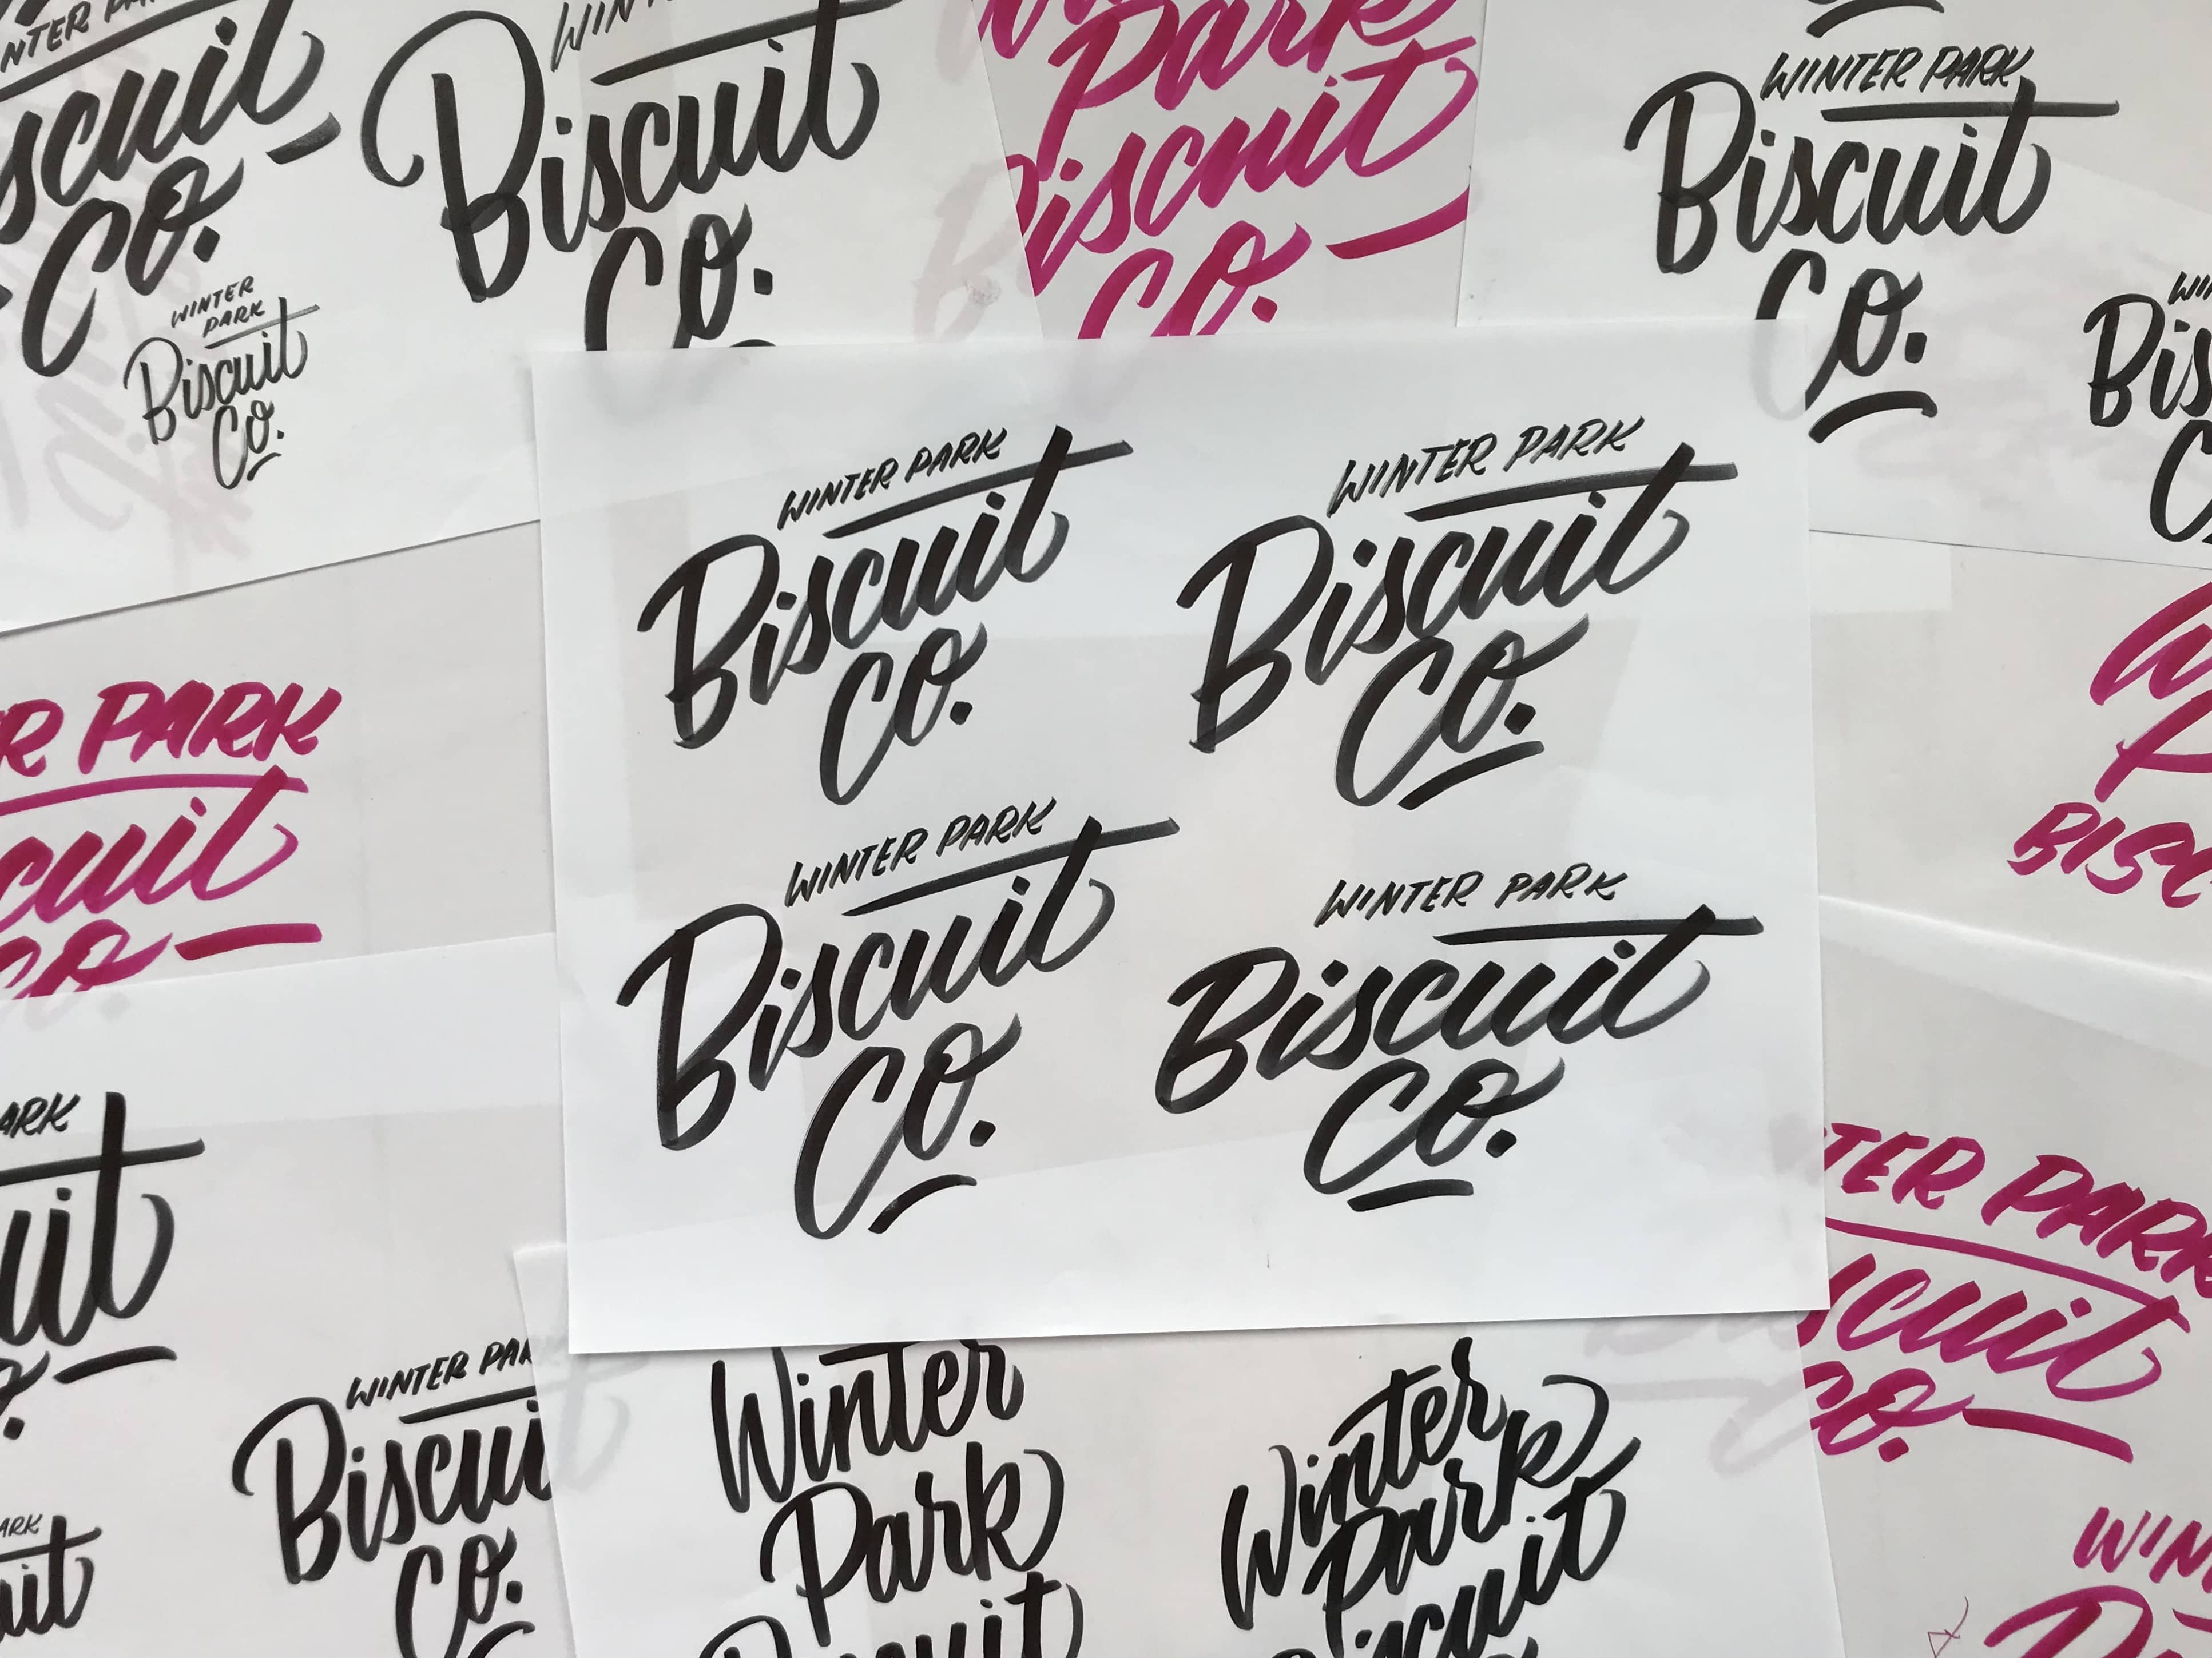 Winter Park Biscuit Co. hand lettered brush lettering sketches